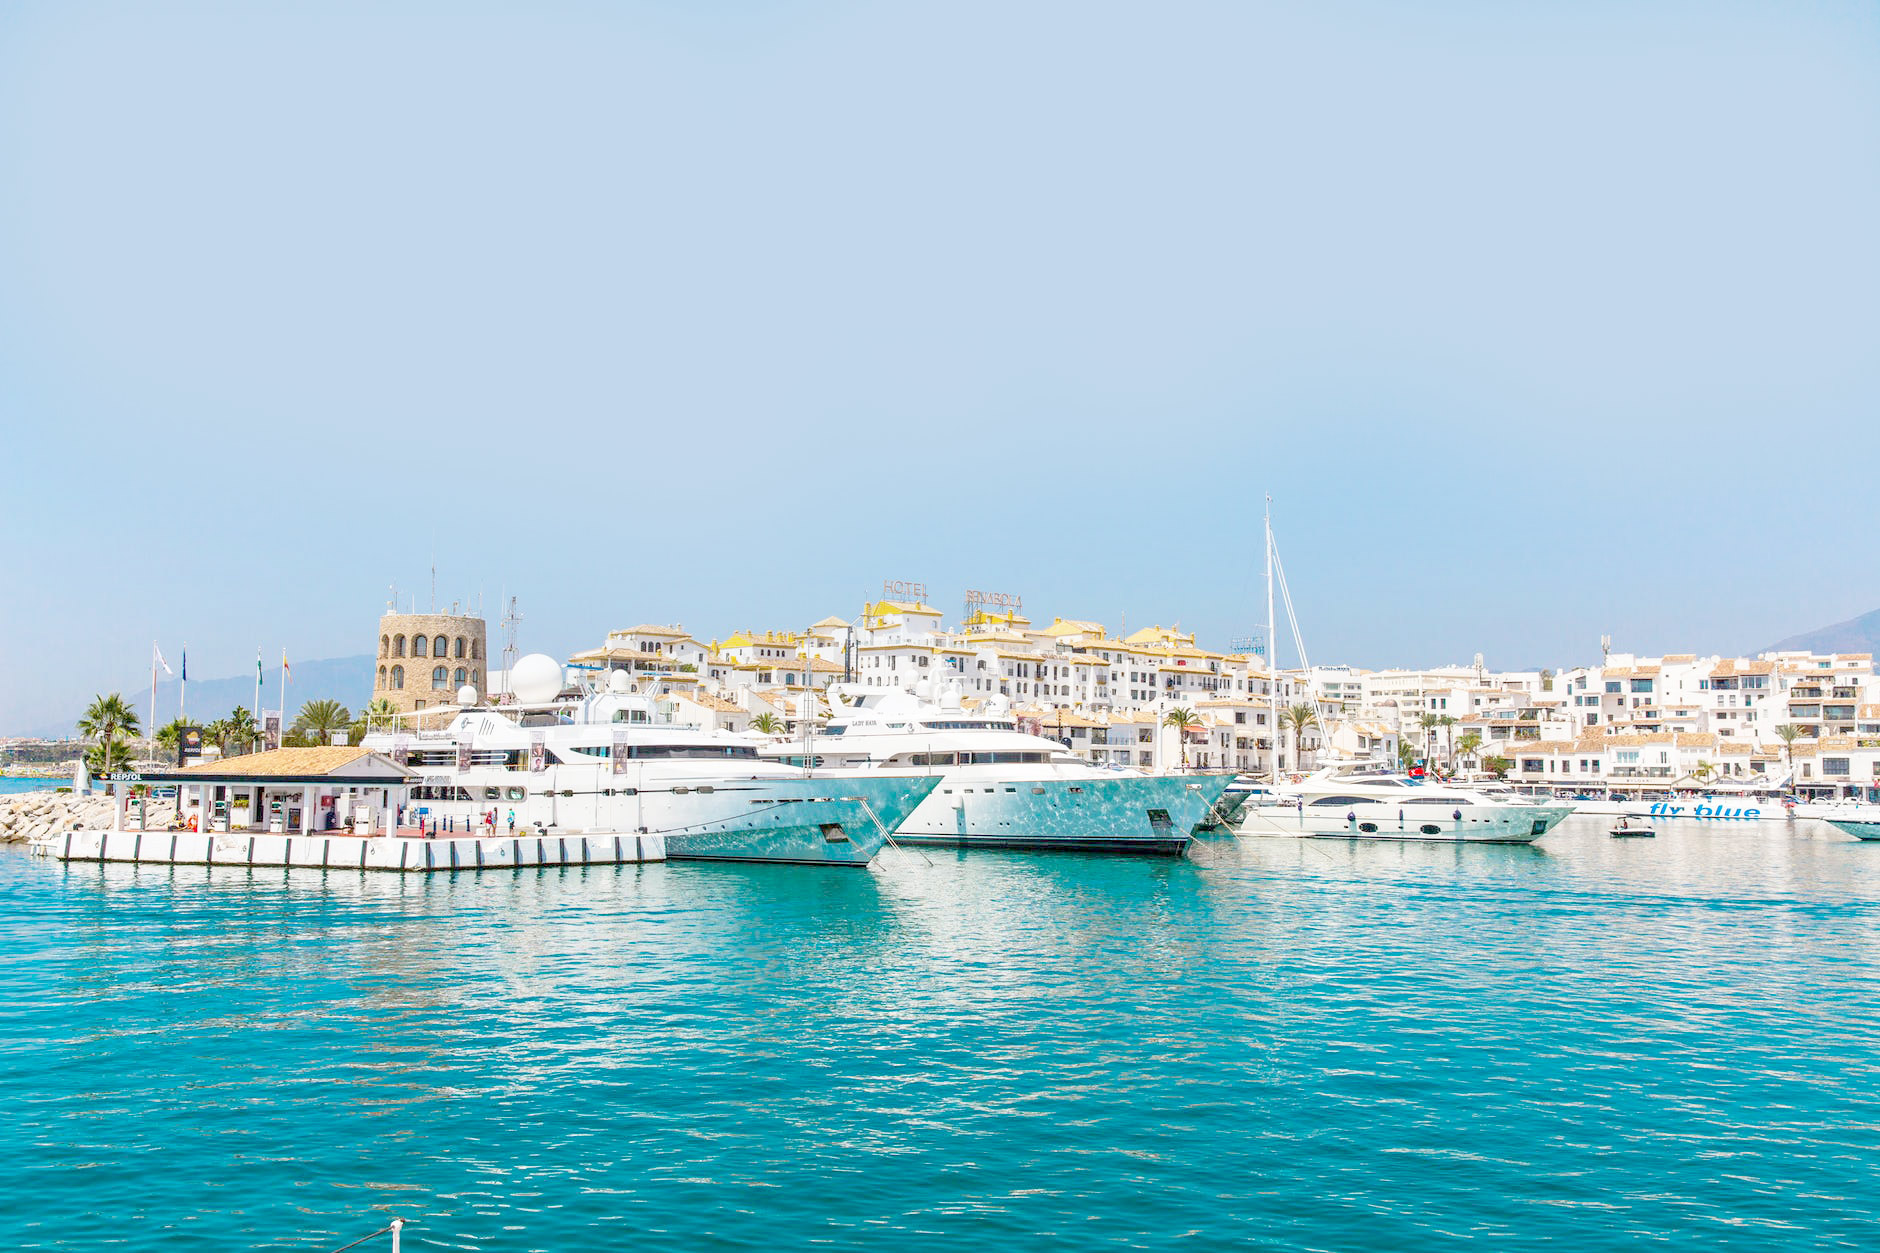 A day in Puerto Banus: what to see, what to do and what to eat